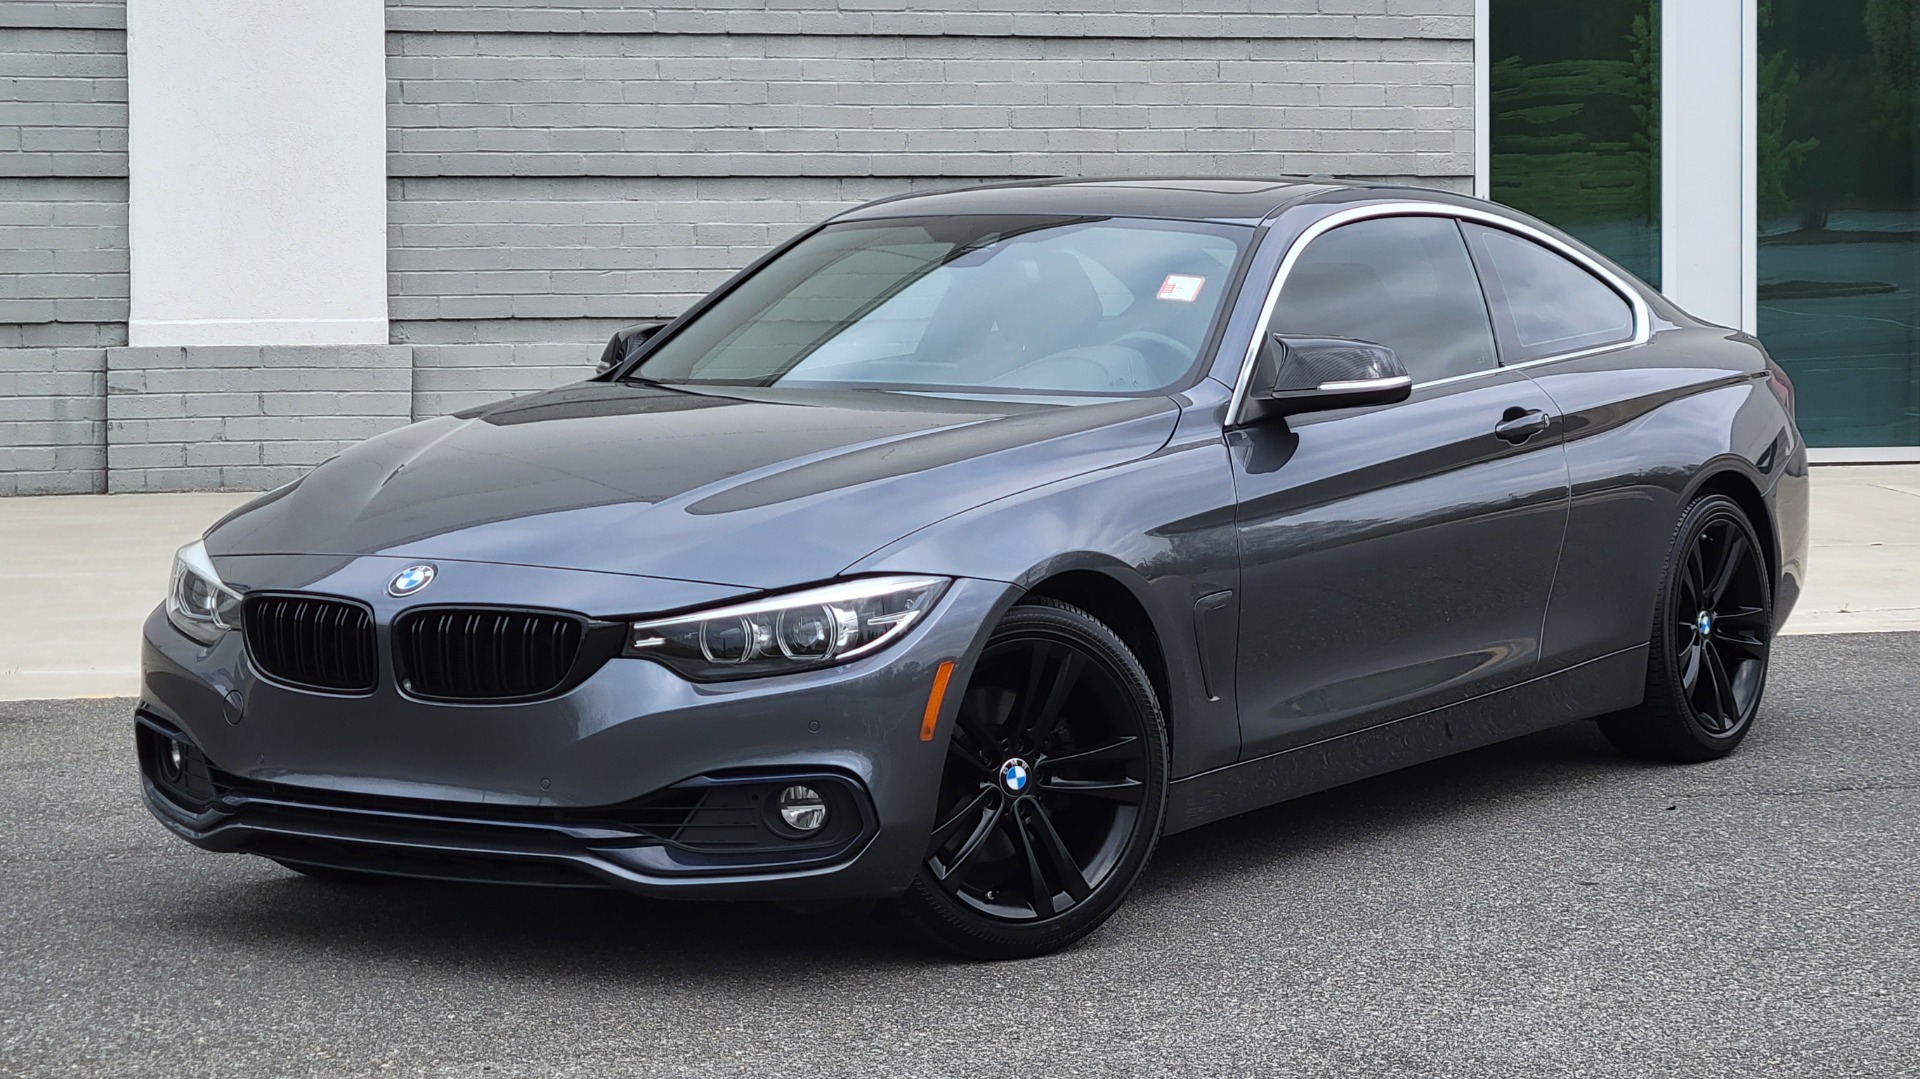 Used 2019 BMW 4 SERIES 430I COUPE 2.0L / RWD / DRVR ASST / CONV PKG / SUNROOF / REARVIEW for sale Sold at Formula Imports in Charlotte NC 28227 11